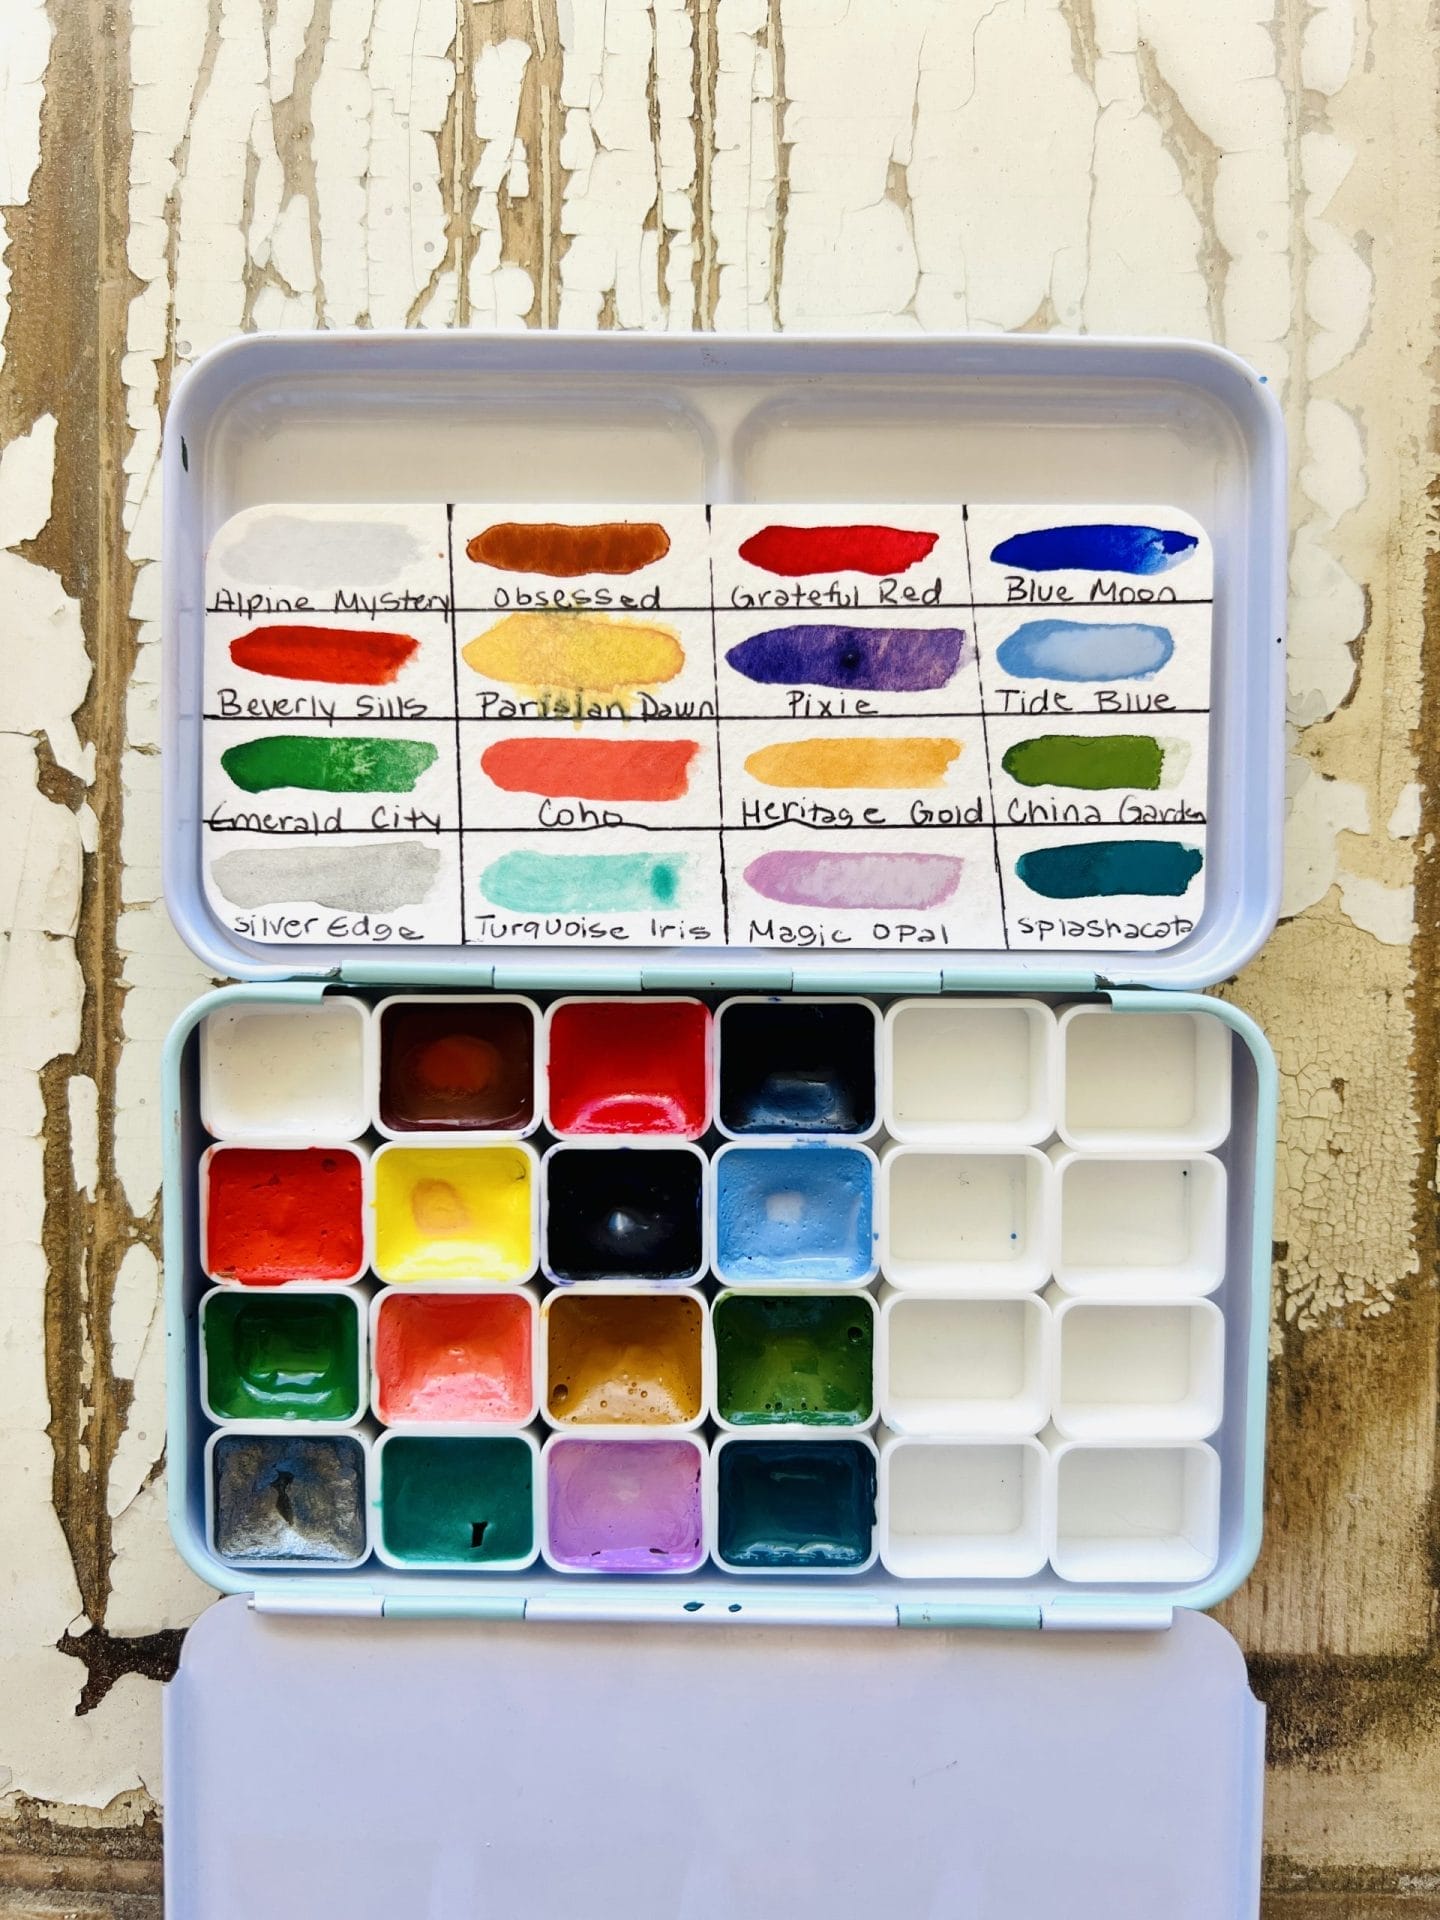 Iris Paints Watercolors - All Natural, Handmade & Hand poured in our home  studio